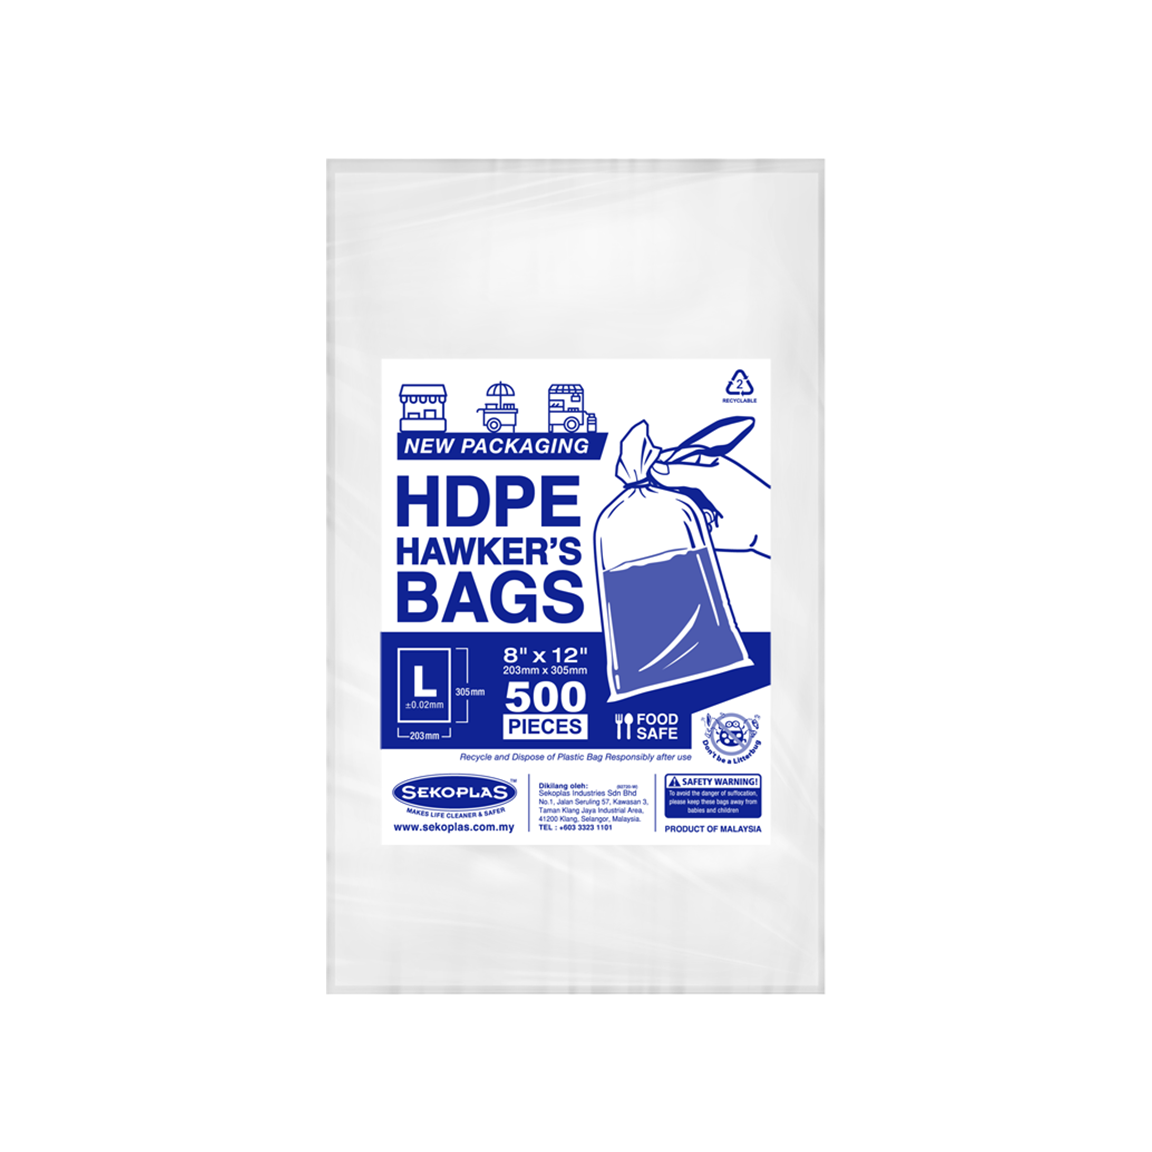 HDPE Hawker’s Bags (Large)